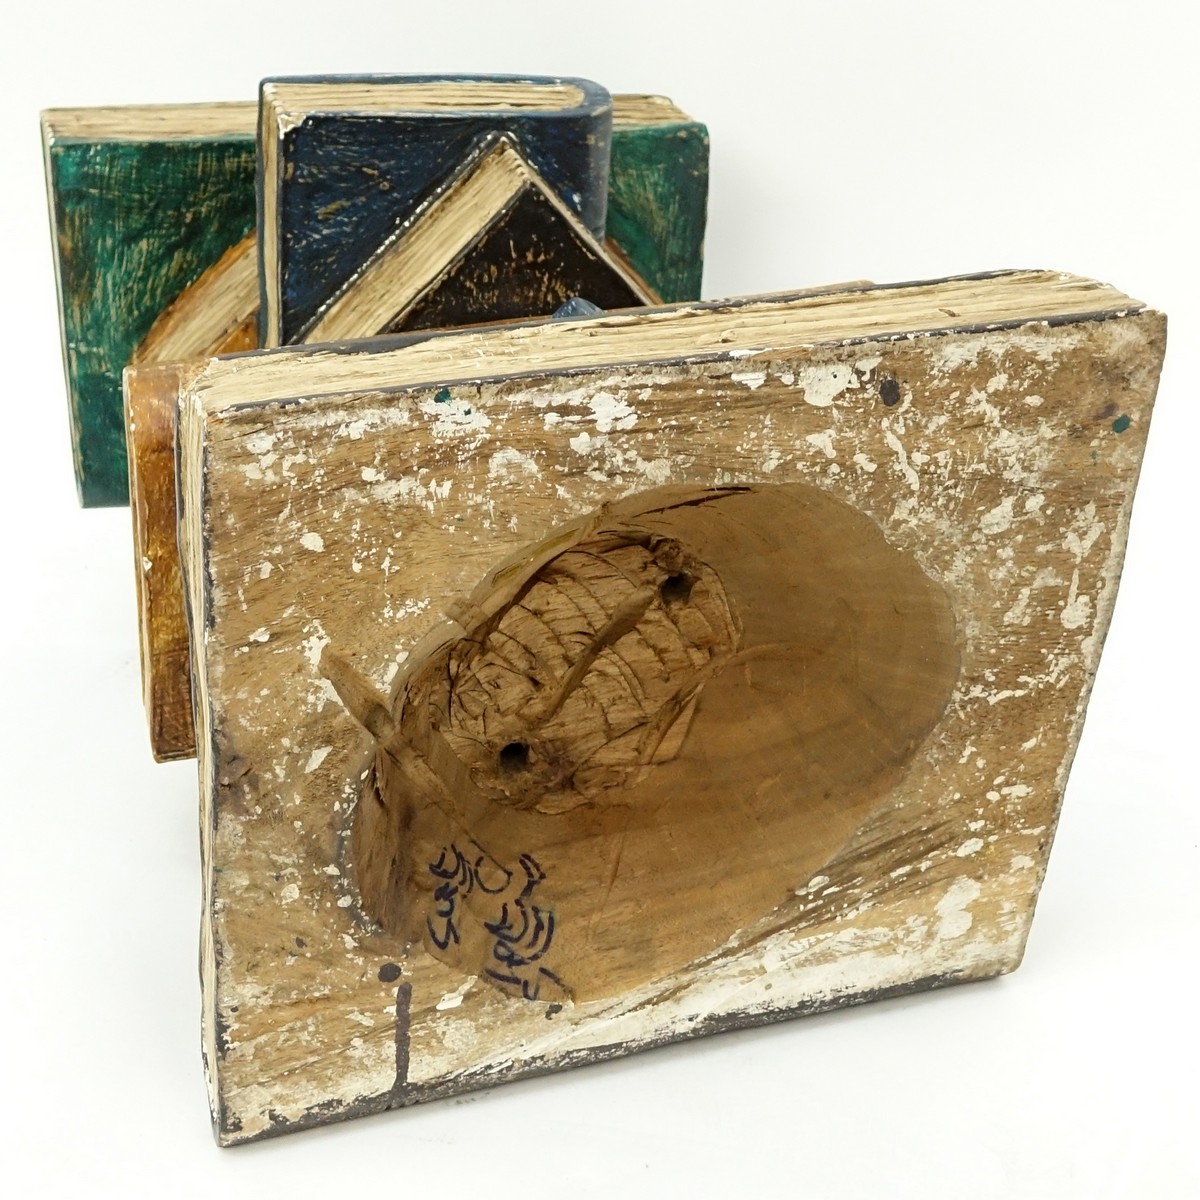 Hand Carved and Painted End Table in the form of Stacked Books. Wear to the corners at the base, rubbing to paint.